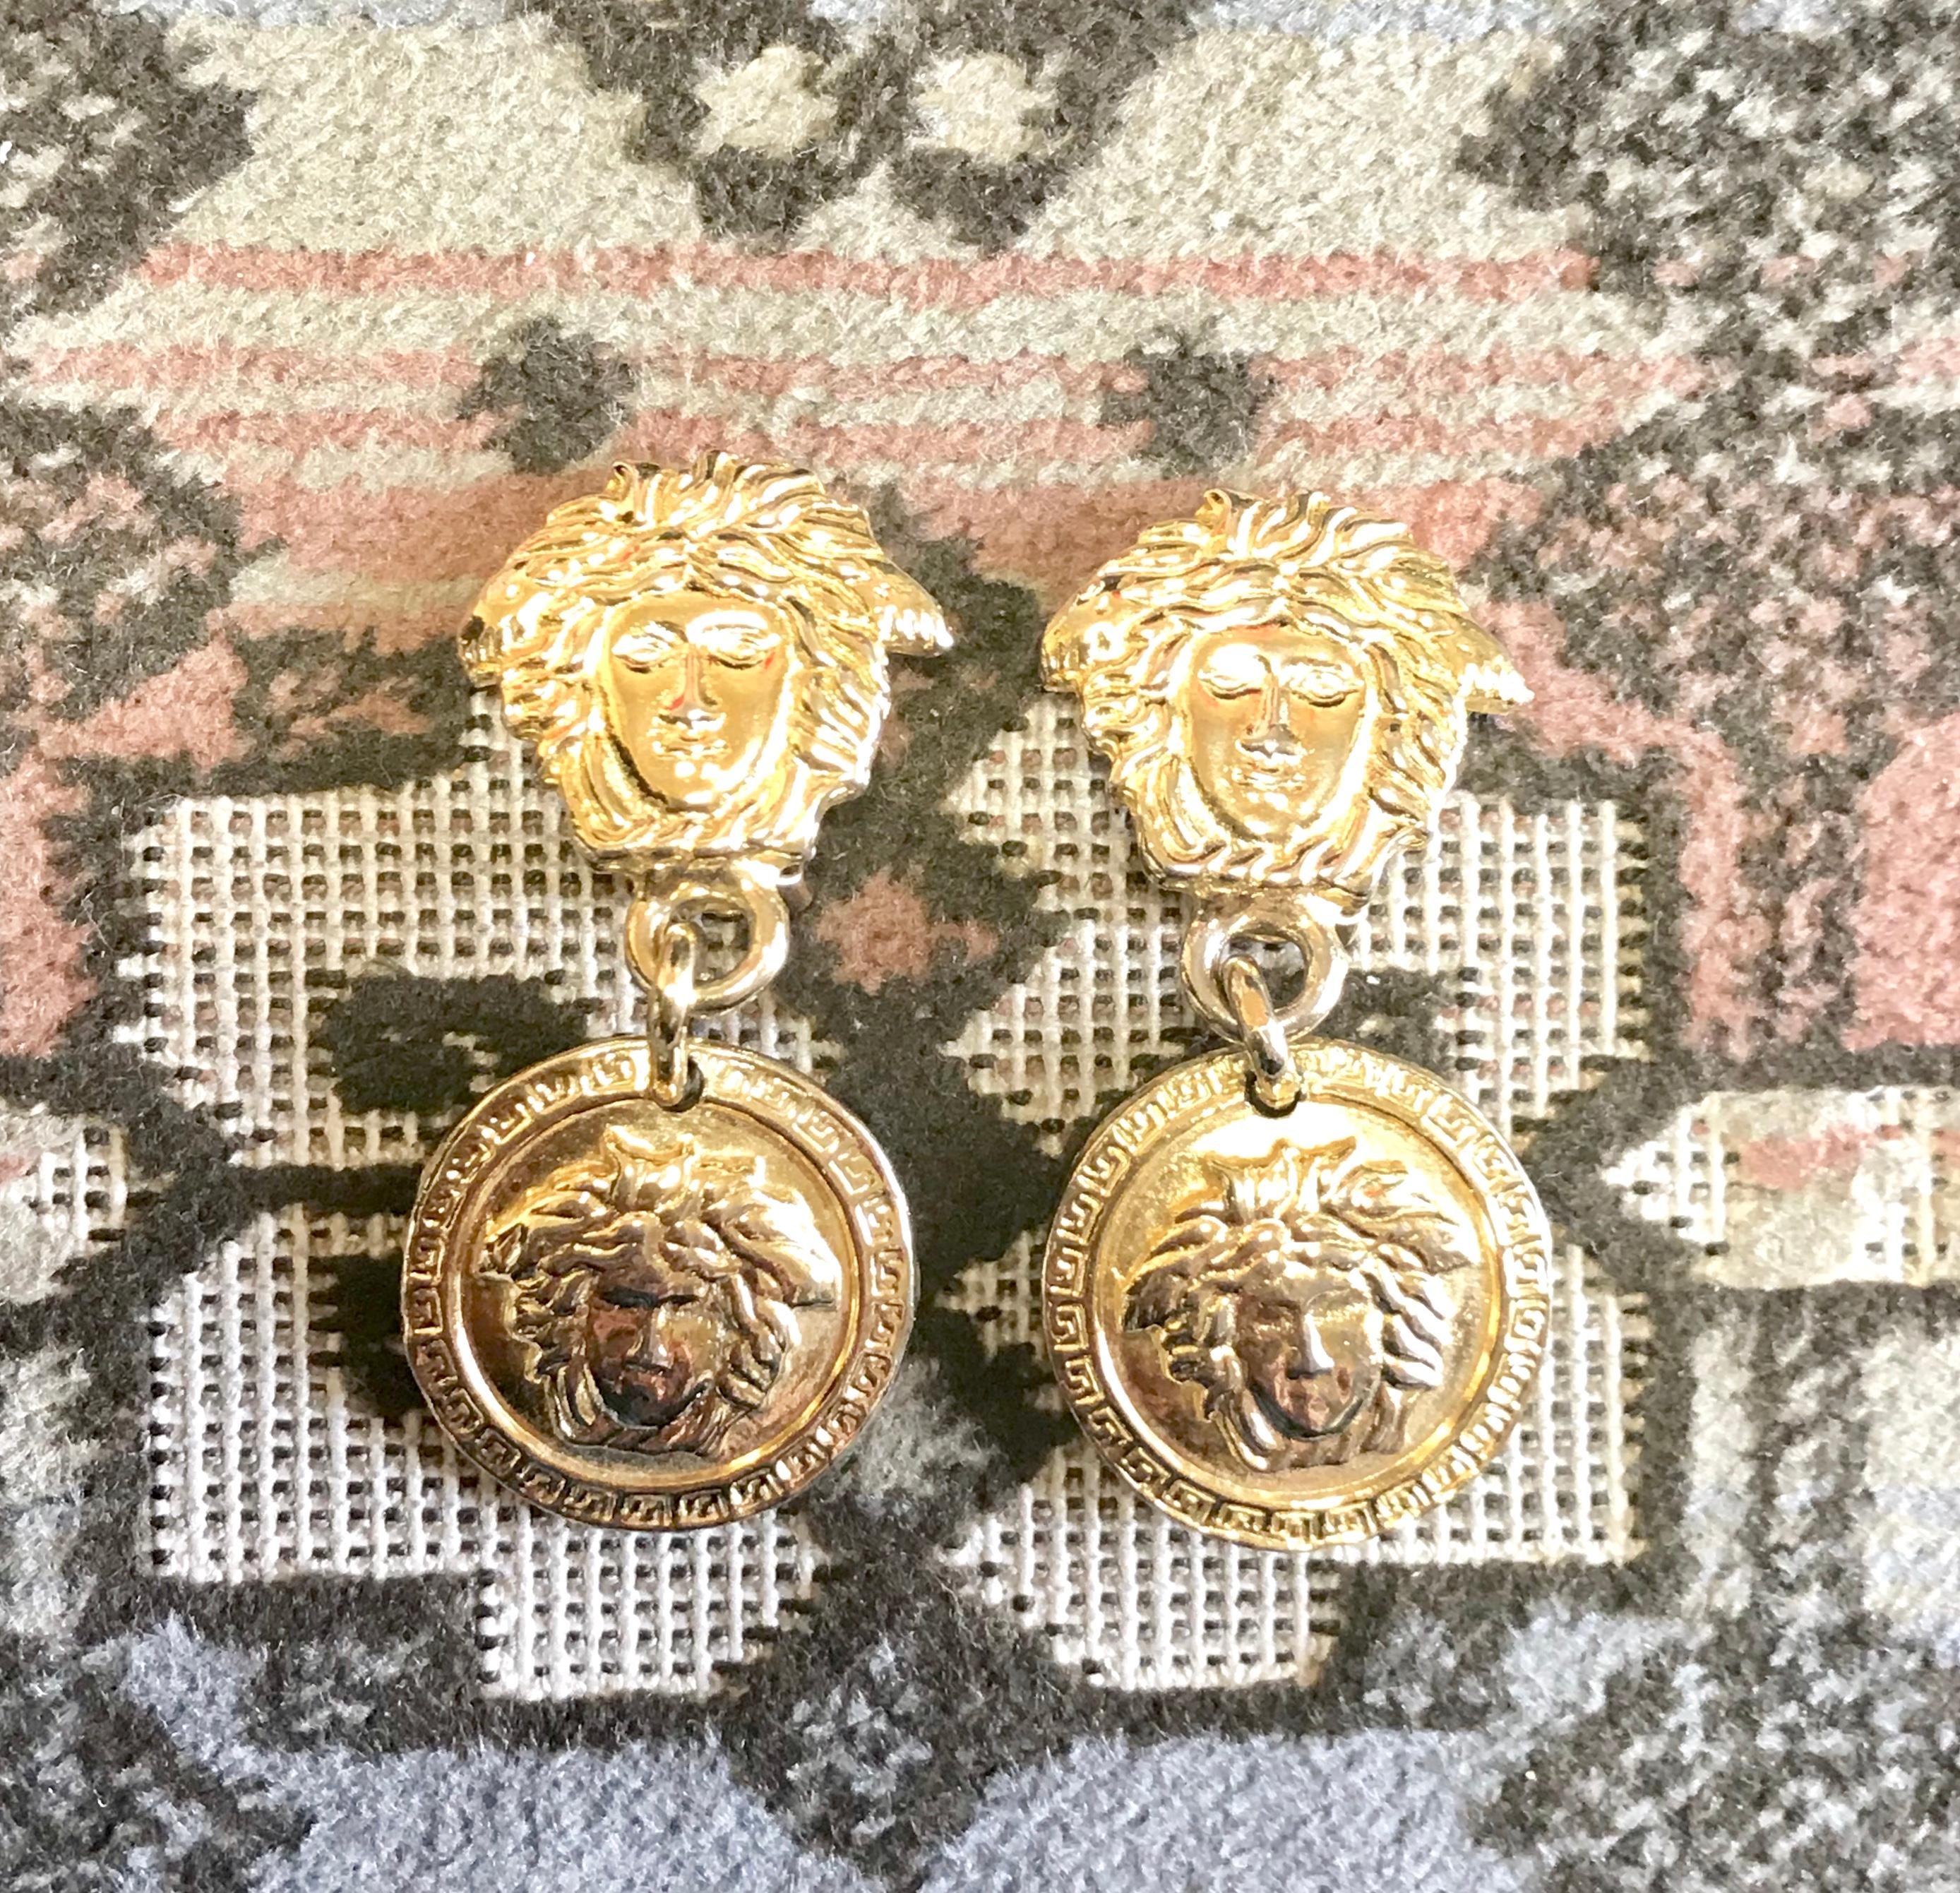 1990s. Vintage Gianni Versace gold tone medusa head/ face motif dangle earrings.  Must have Lady Gaga style jewelry piece. Great gift.

For all vintage Versace lovers and collectors!

Introducing a vintage earring set from GIANNI VERSACE back in the